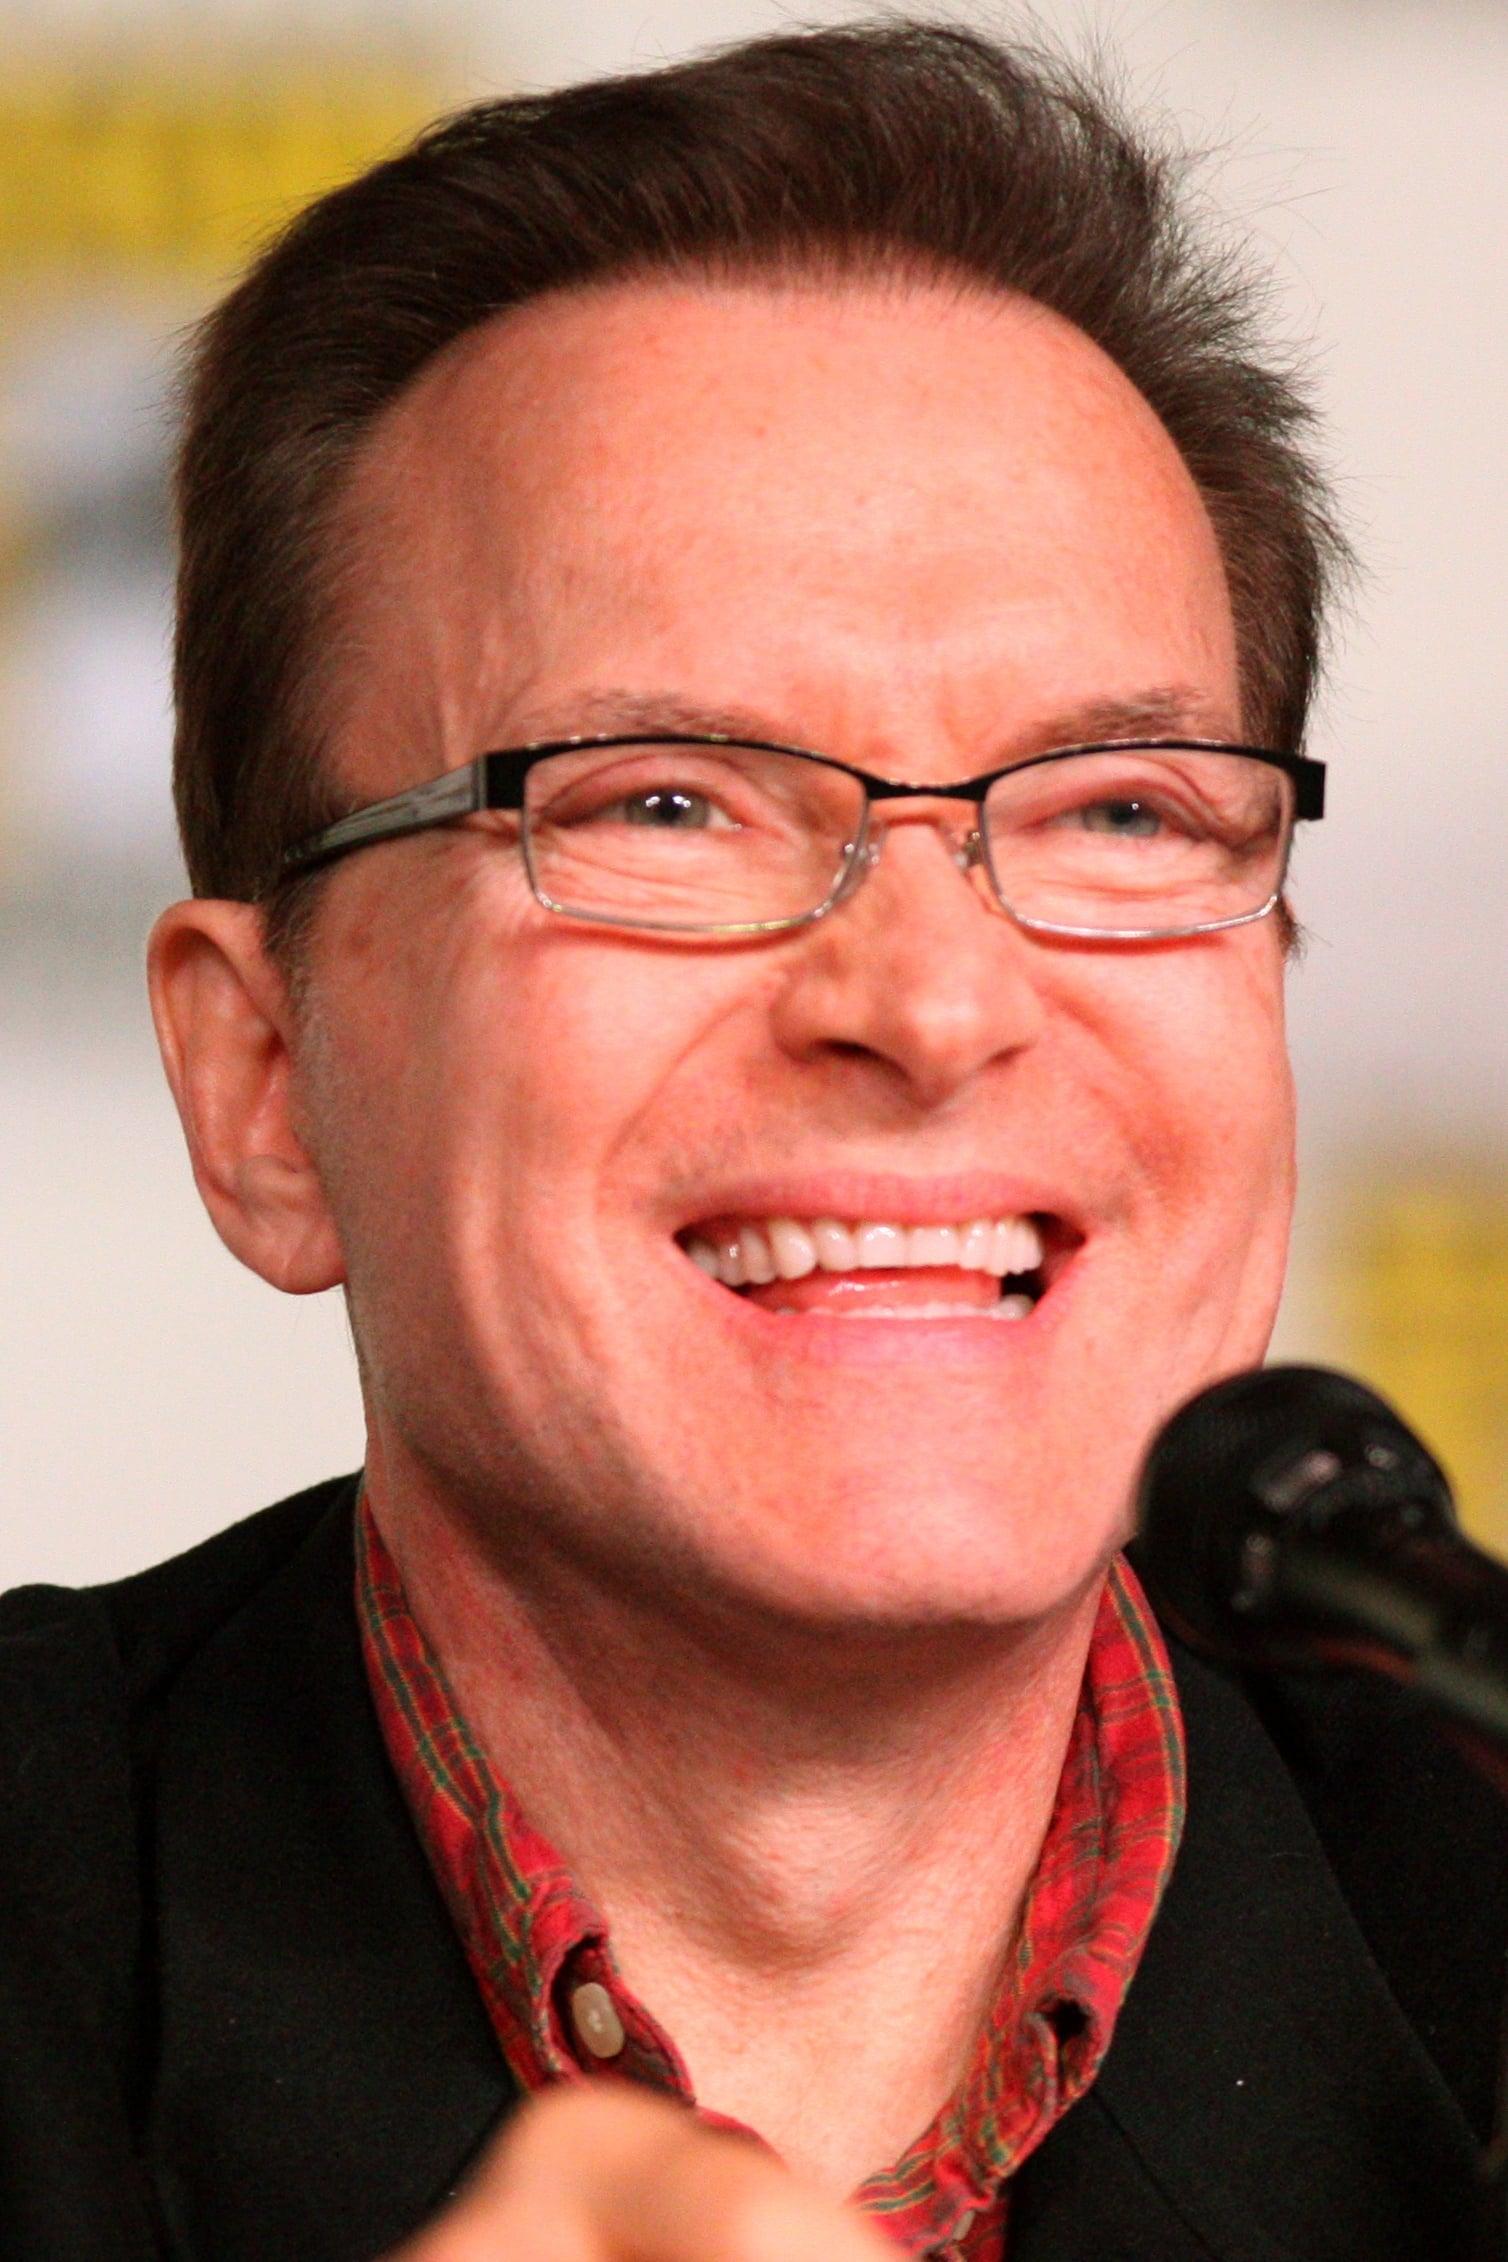 Billy West | Philip Fry / Dr. Zoidberg / Prof. Farnsworth / Various (voice)